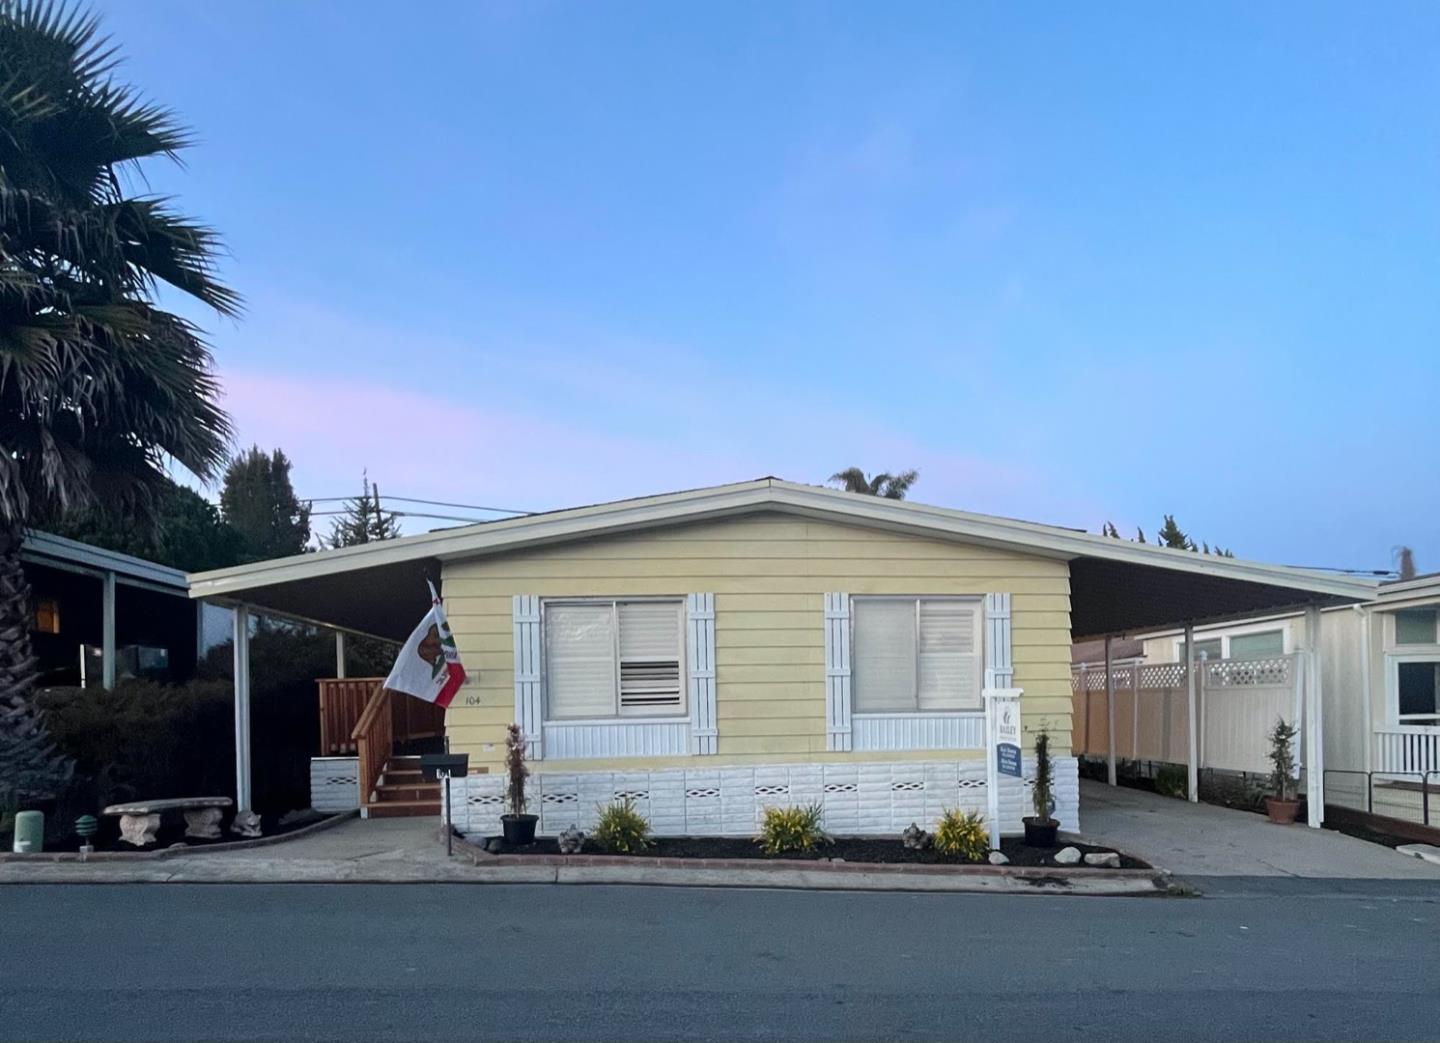 Photo of 104 Crespi Wy #104 in Watsonville, CA